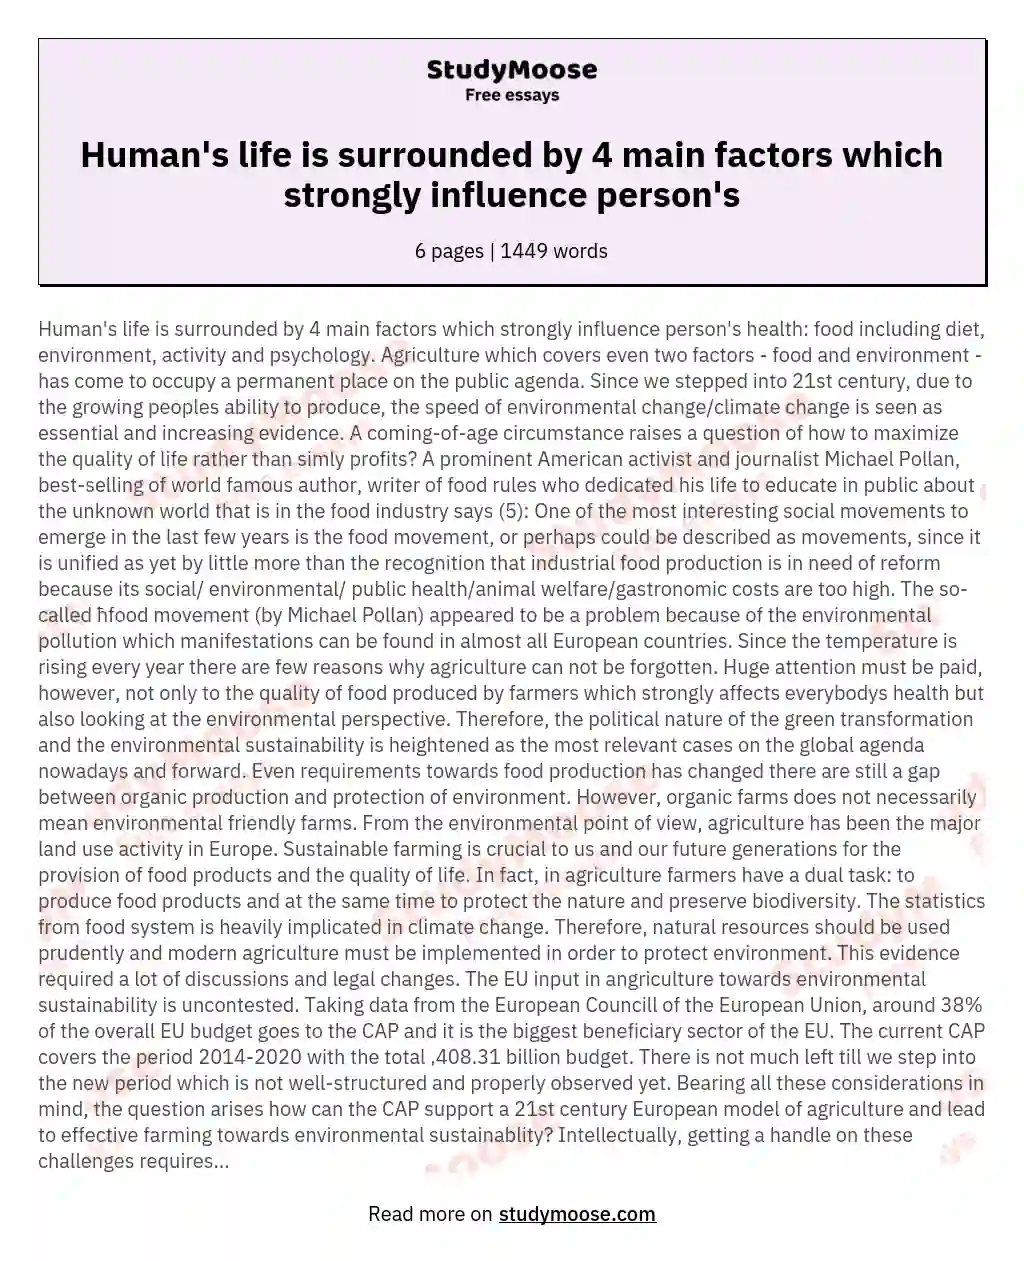 Human's life is surrounded by 4 main factors which strongly influence person's essay